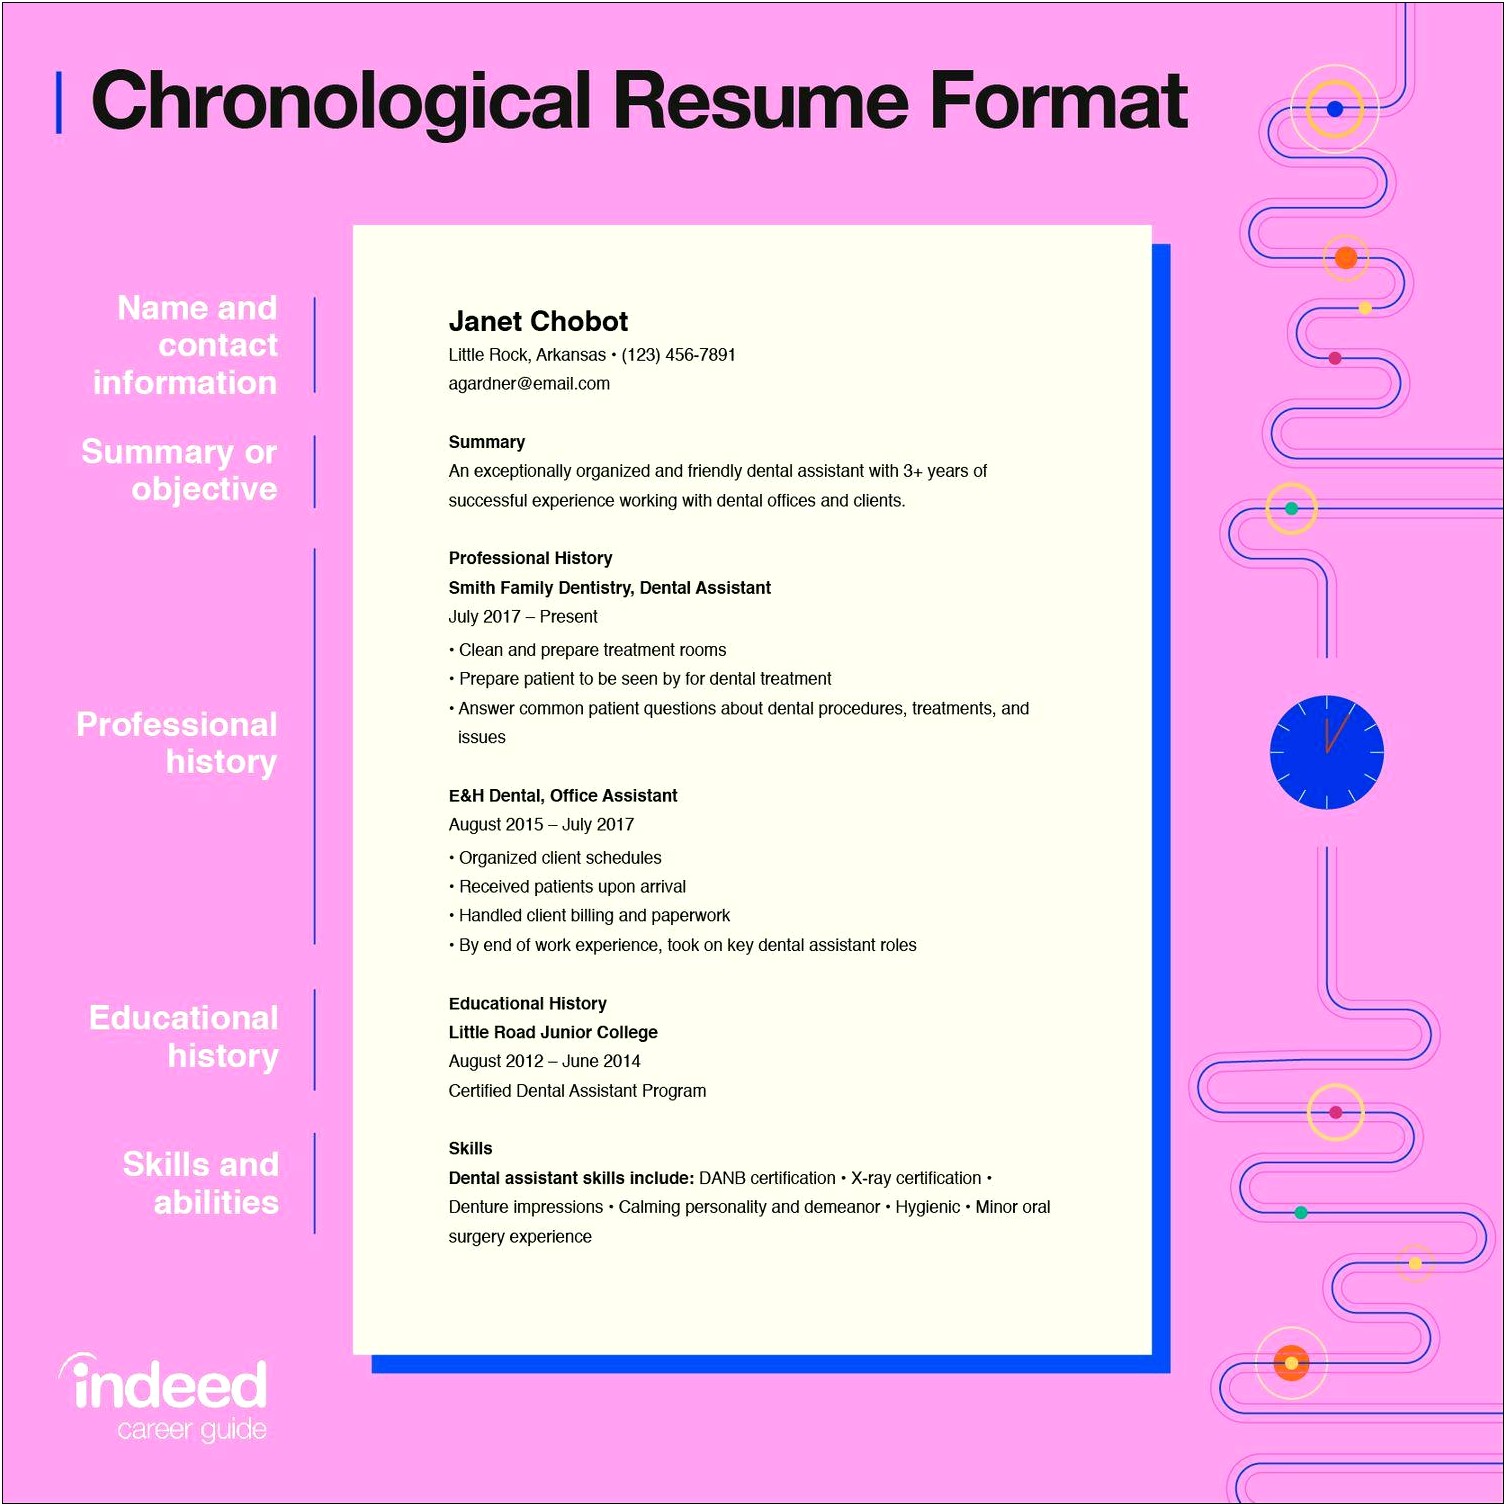 Should You Put Very Short Employment On Resume